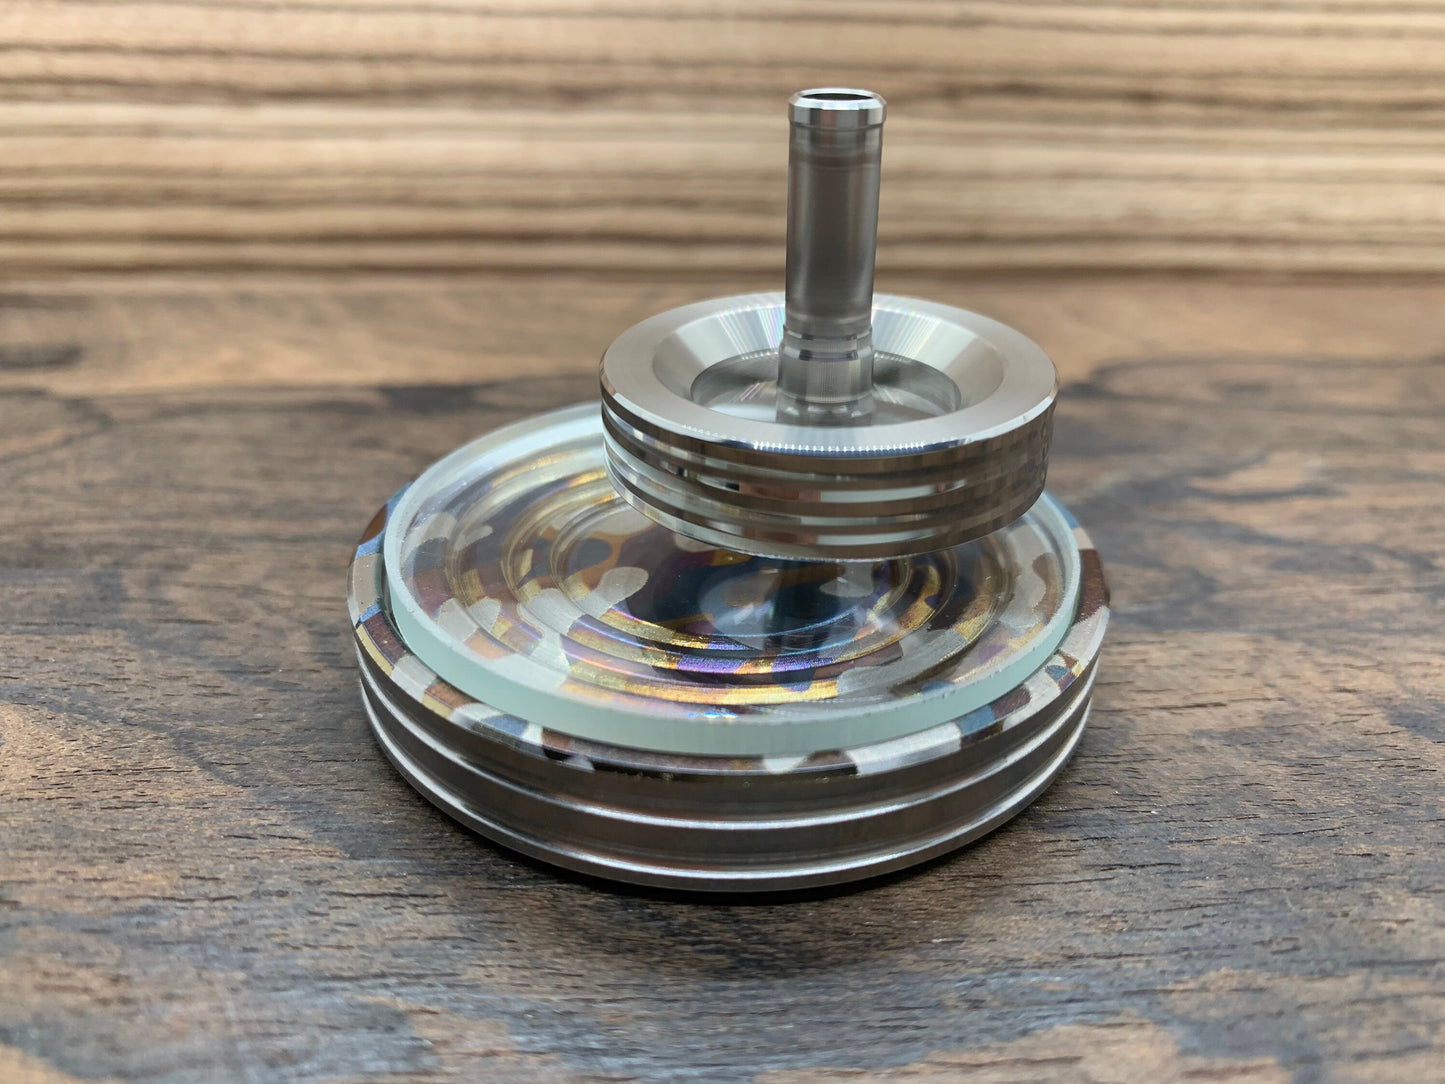 Camouflage Titanium Spin base for Spinning Tops & Coins